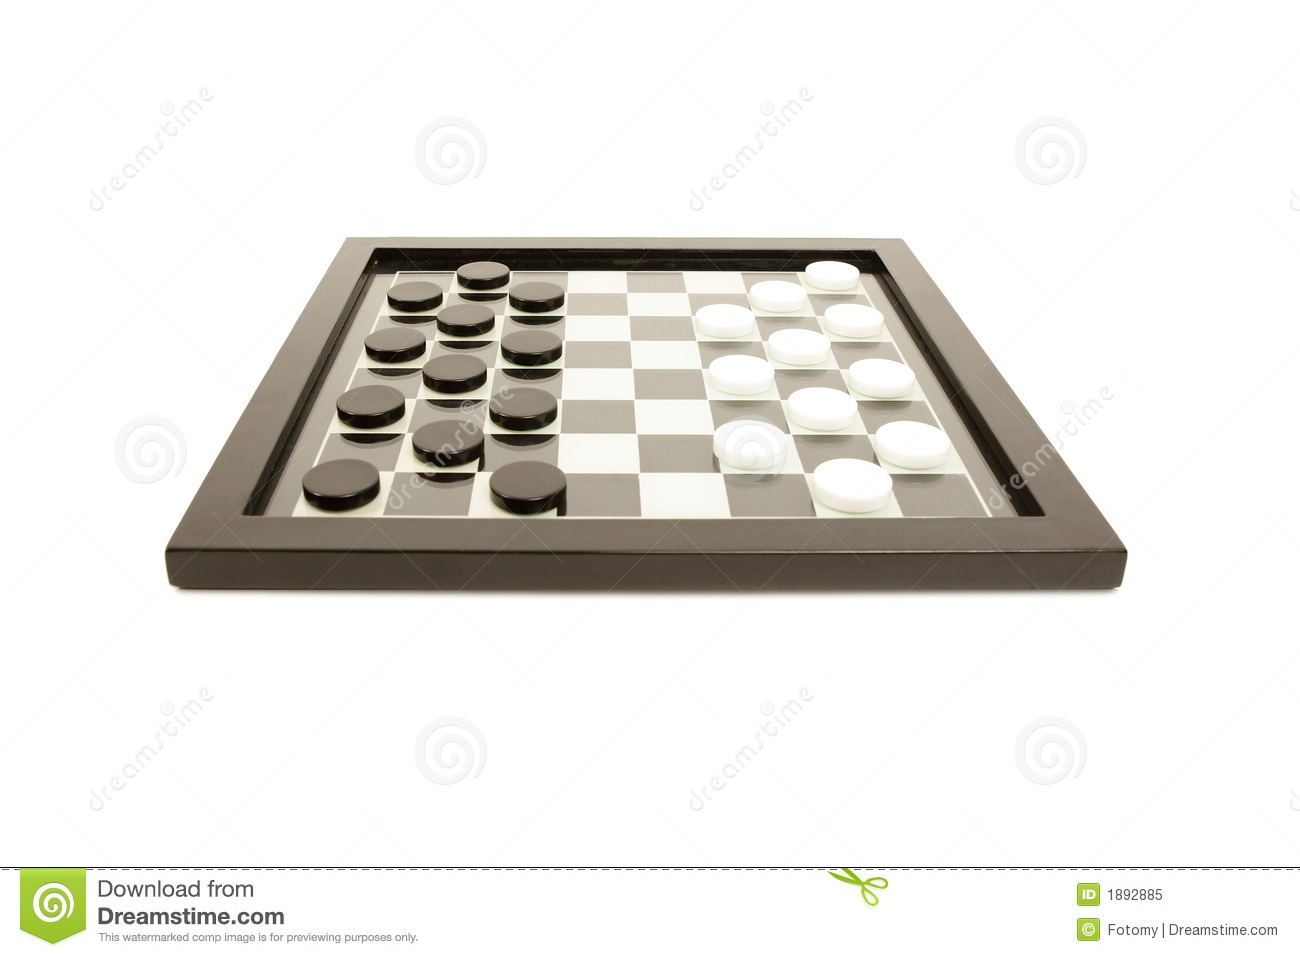 Board Games Clipart Black And White Black And White Board Game